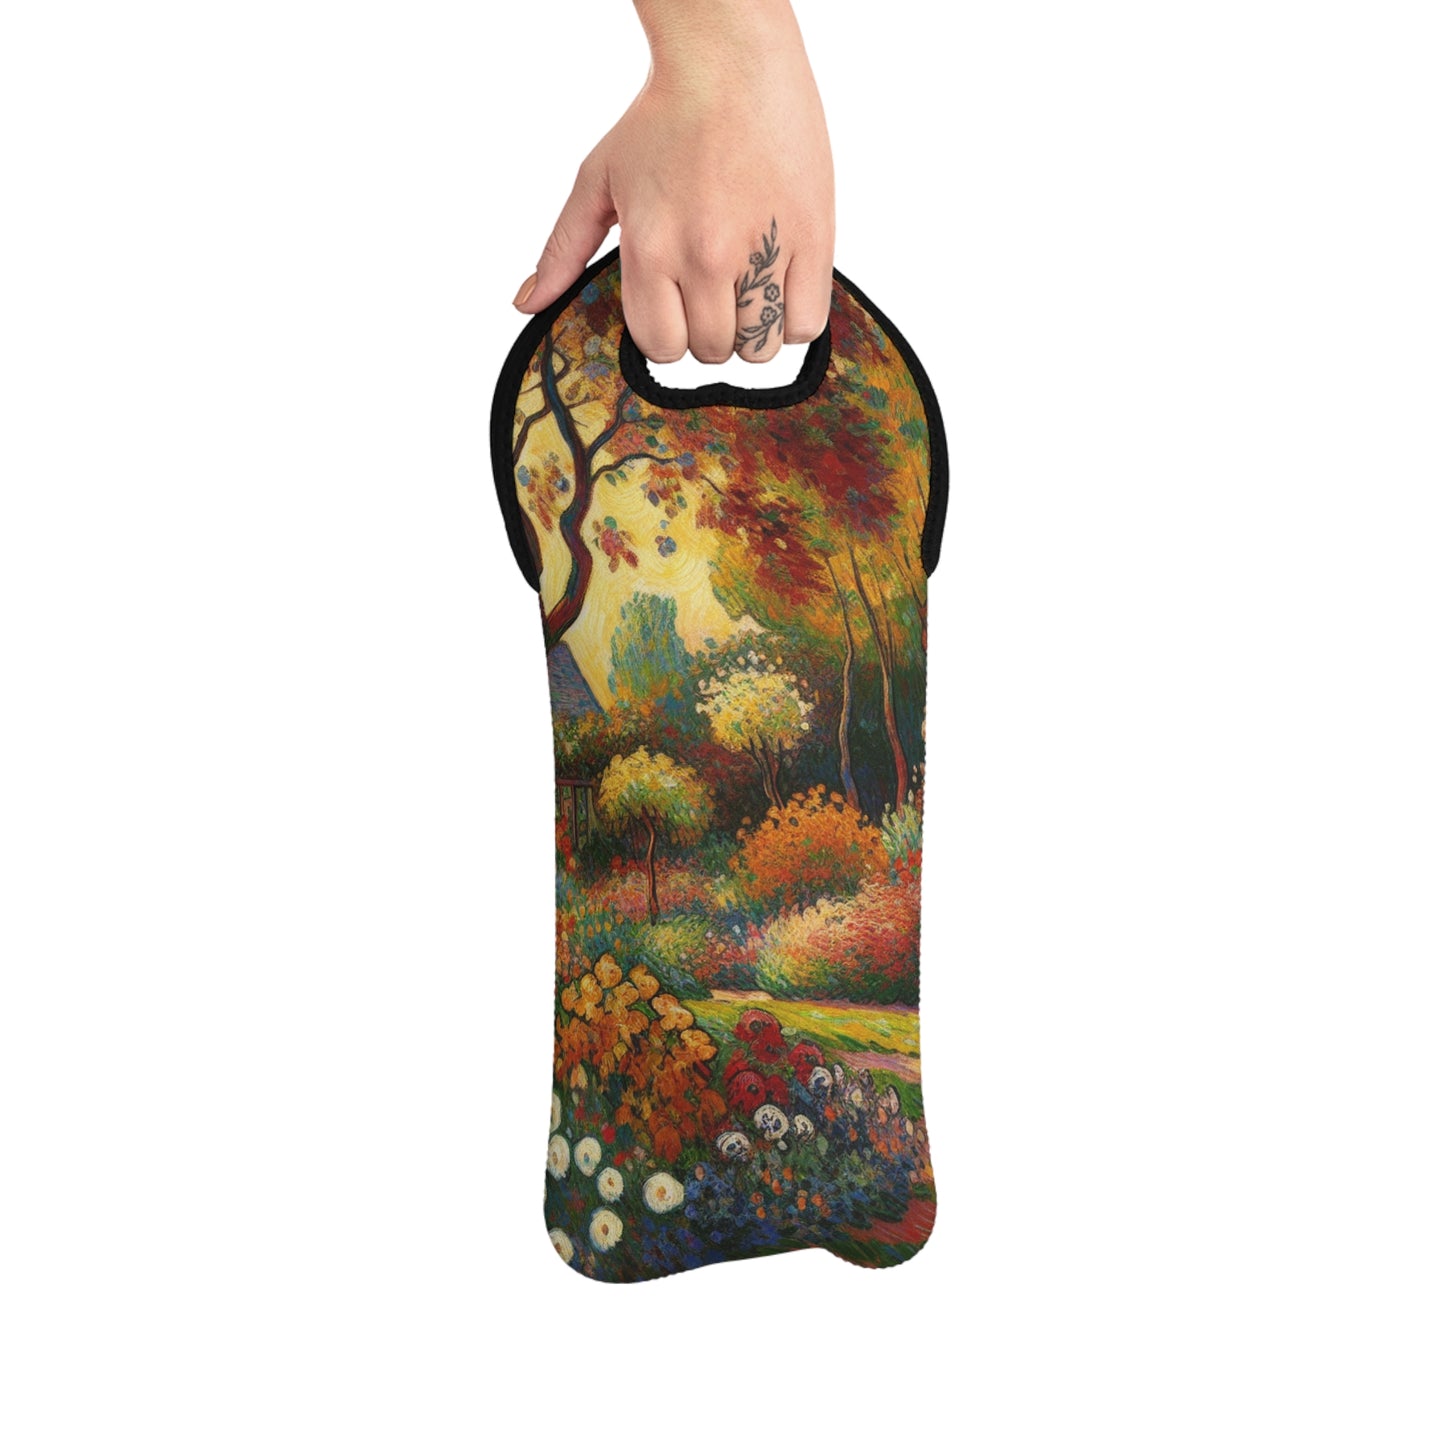 "Fauvist Garden Oasis" - The Alien Wine Tote Bag Fauvism Style